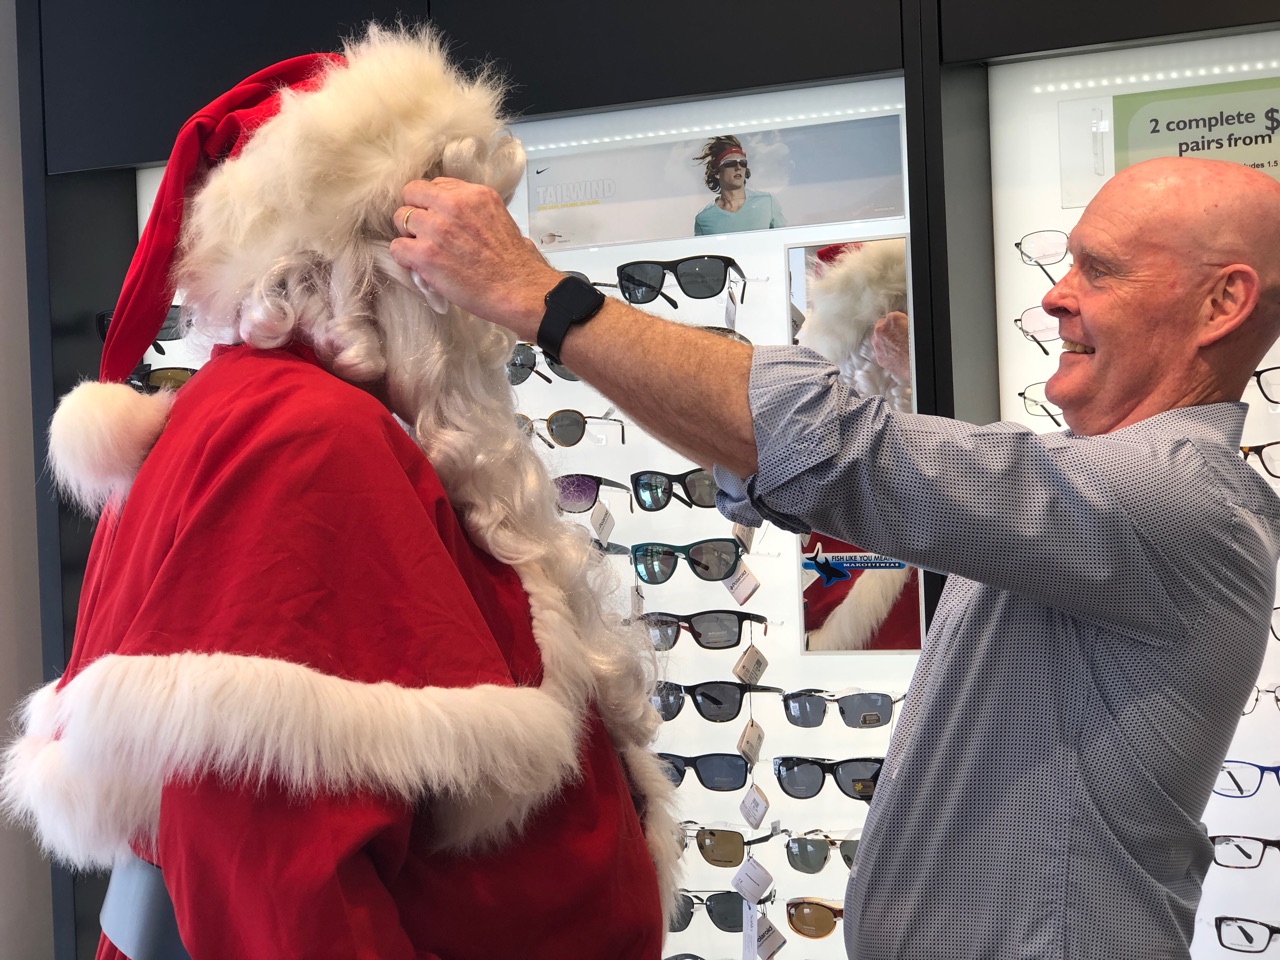 Our qualified optical dispenser Mark couldn’t believe there’d come a day he’s gonna fit spectacles on one of the most loved figures of all time—Father Christmas himself!